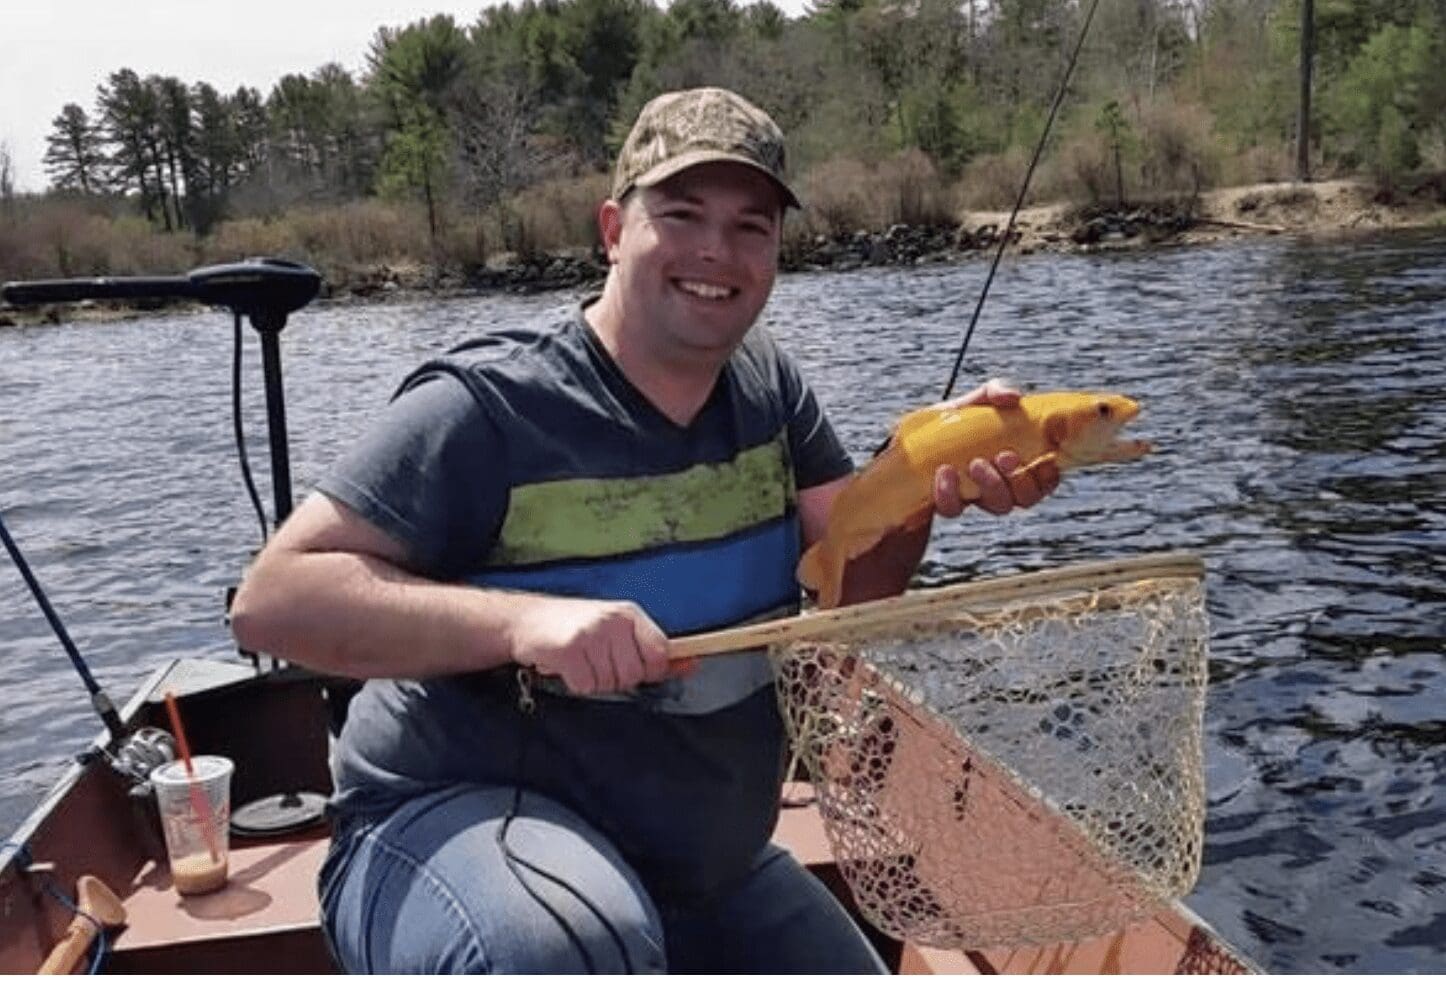 A man in a boat holding an orange fish.